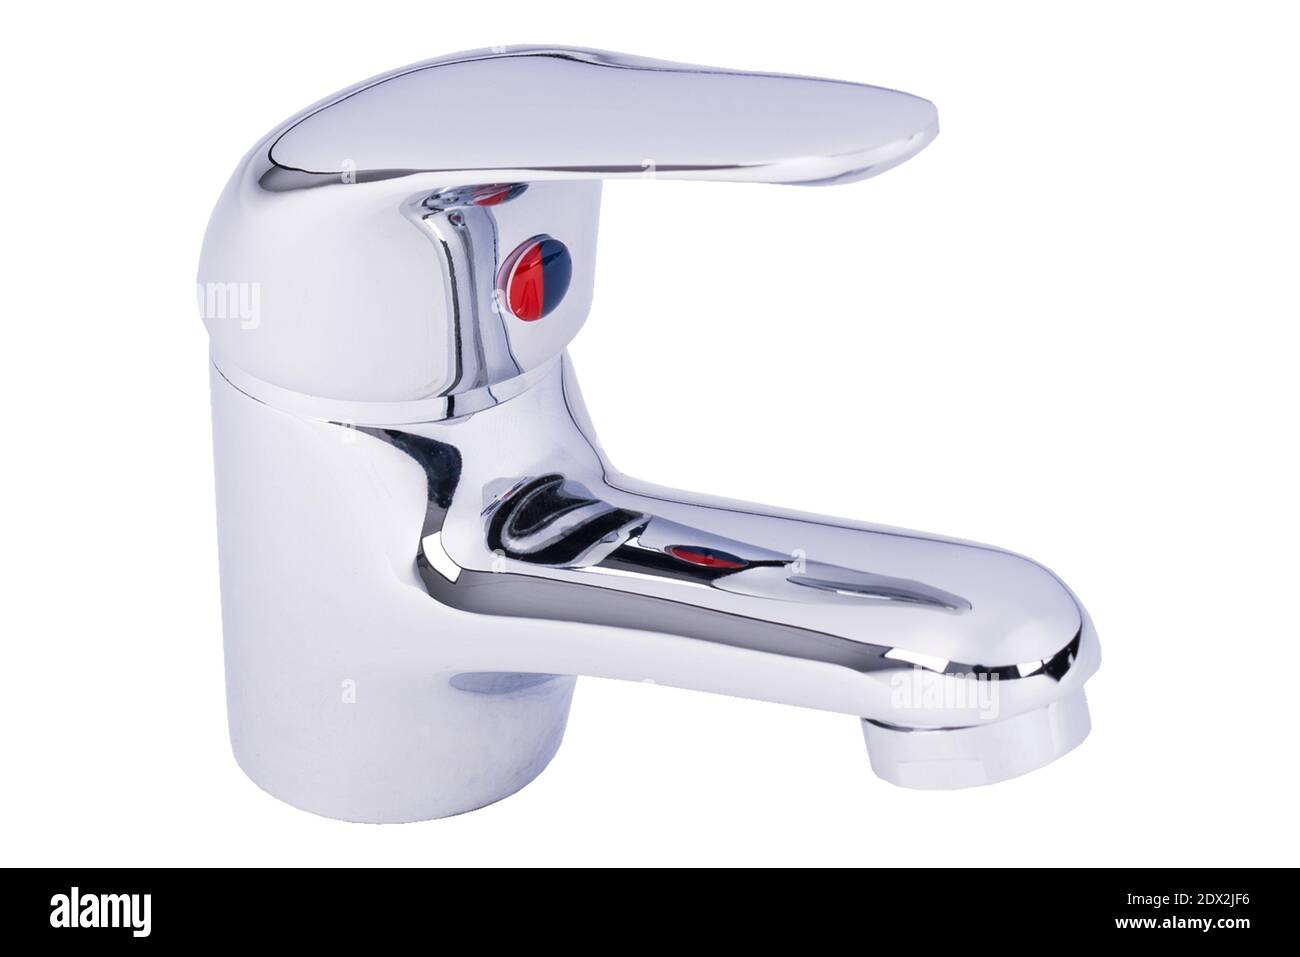 https://c8.alamy.com/comp/2DX2JF6/a-modern-faucet-a-coldhot-water-mixer-tap-for-bathroom-and-kitchen-isolated-on-a-white-background-2DX2JF6.jpg